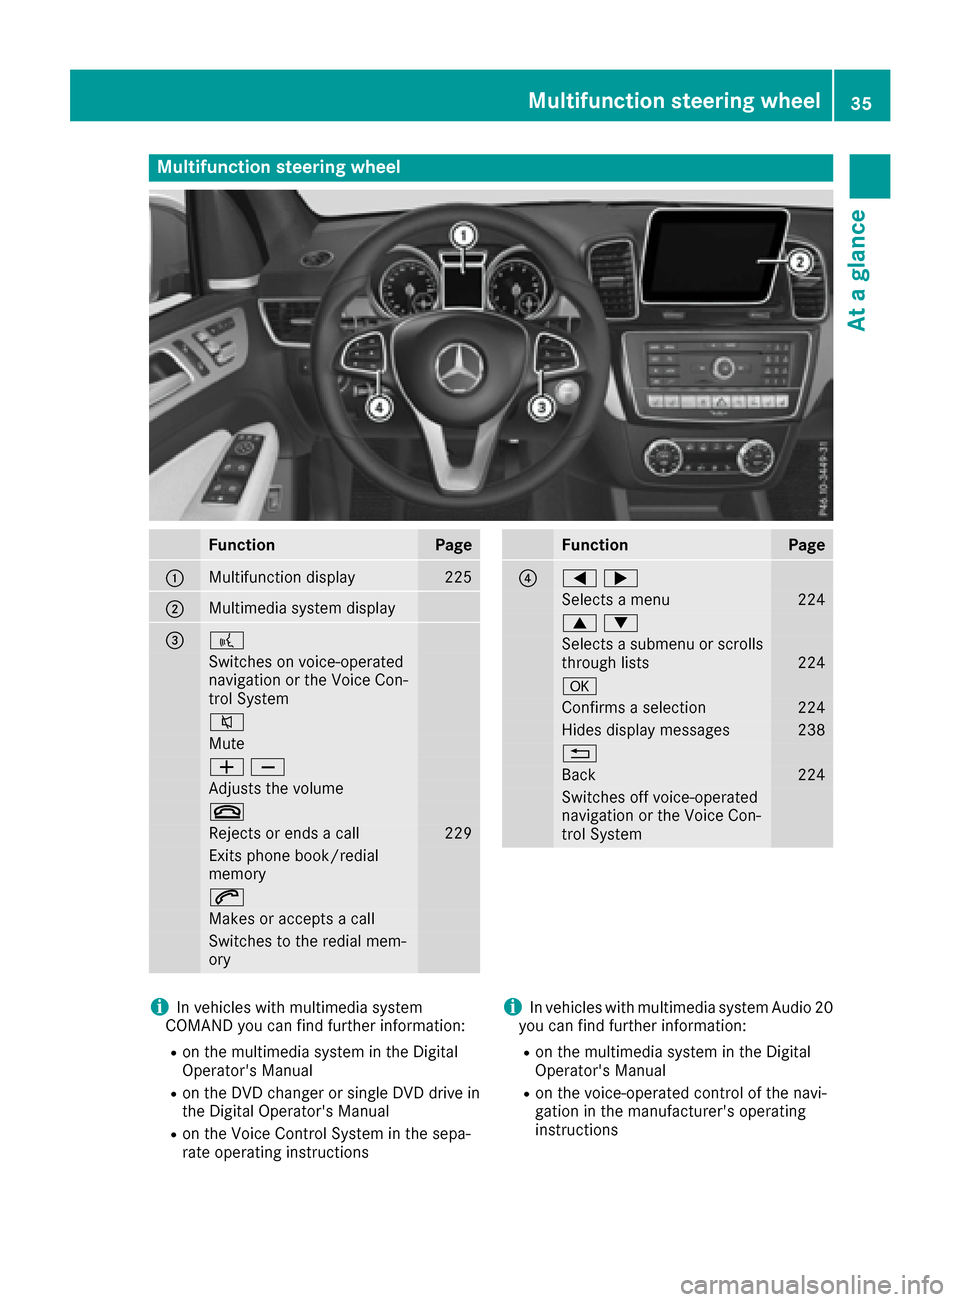 MERCEDES-BENZ GLE SUV 2017 W166 Owners Manual Multifunction steering wheel
FunctionPage
:Multifunction display225
;Multimedia system display
=?
Switches on voice-operated
navigation or the Voice Con-
trol System
8
Mute
WX
Adjusts the volume
~
Rej